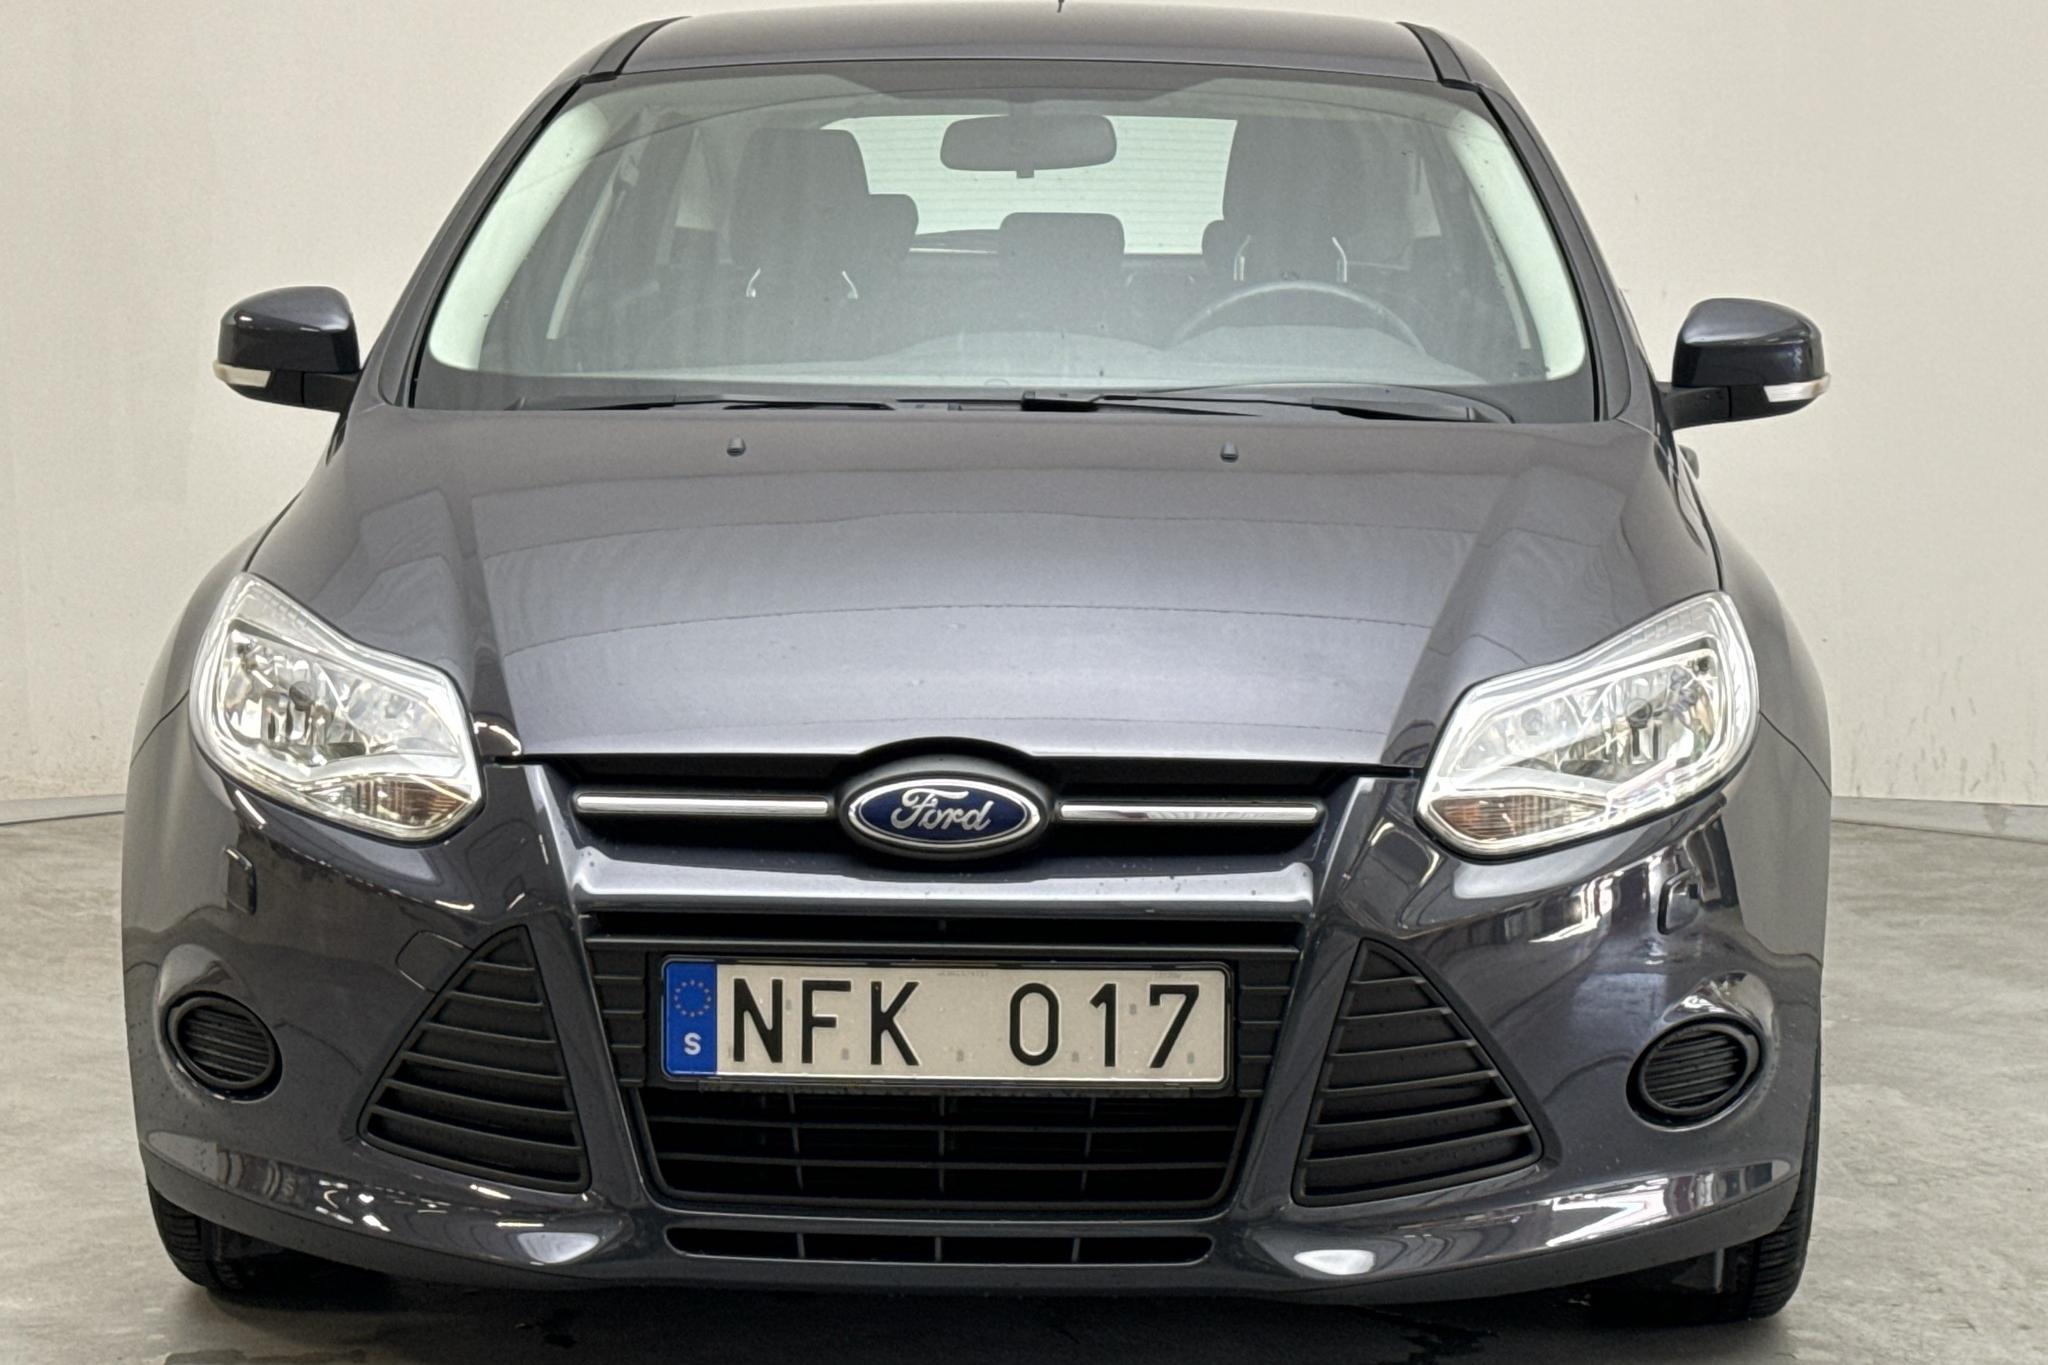 Ford Focus 1.0 EcoBoost 5dr (100hk) - 43 060 km - Manual - gray - 2013